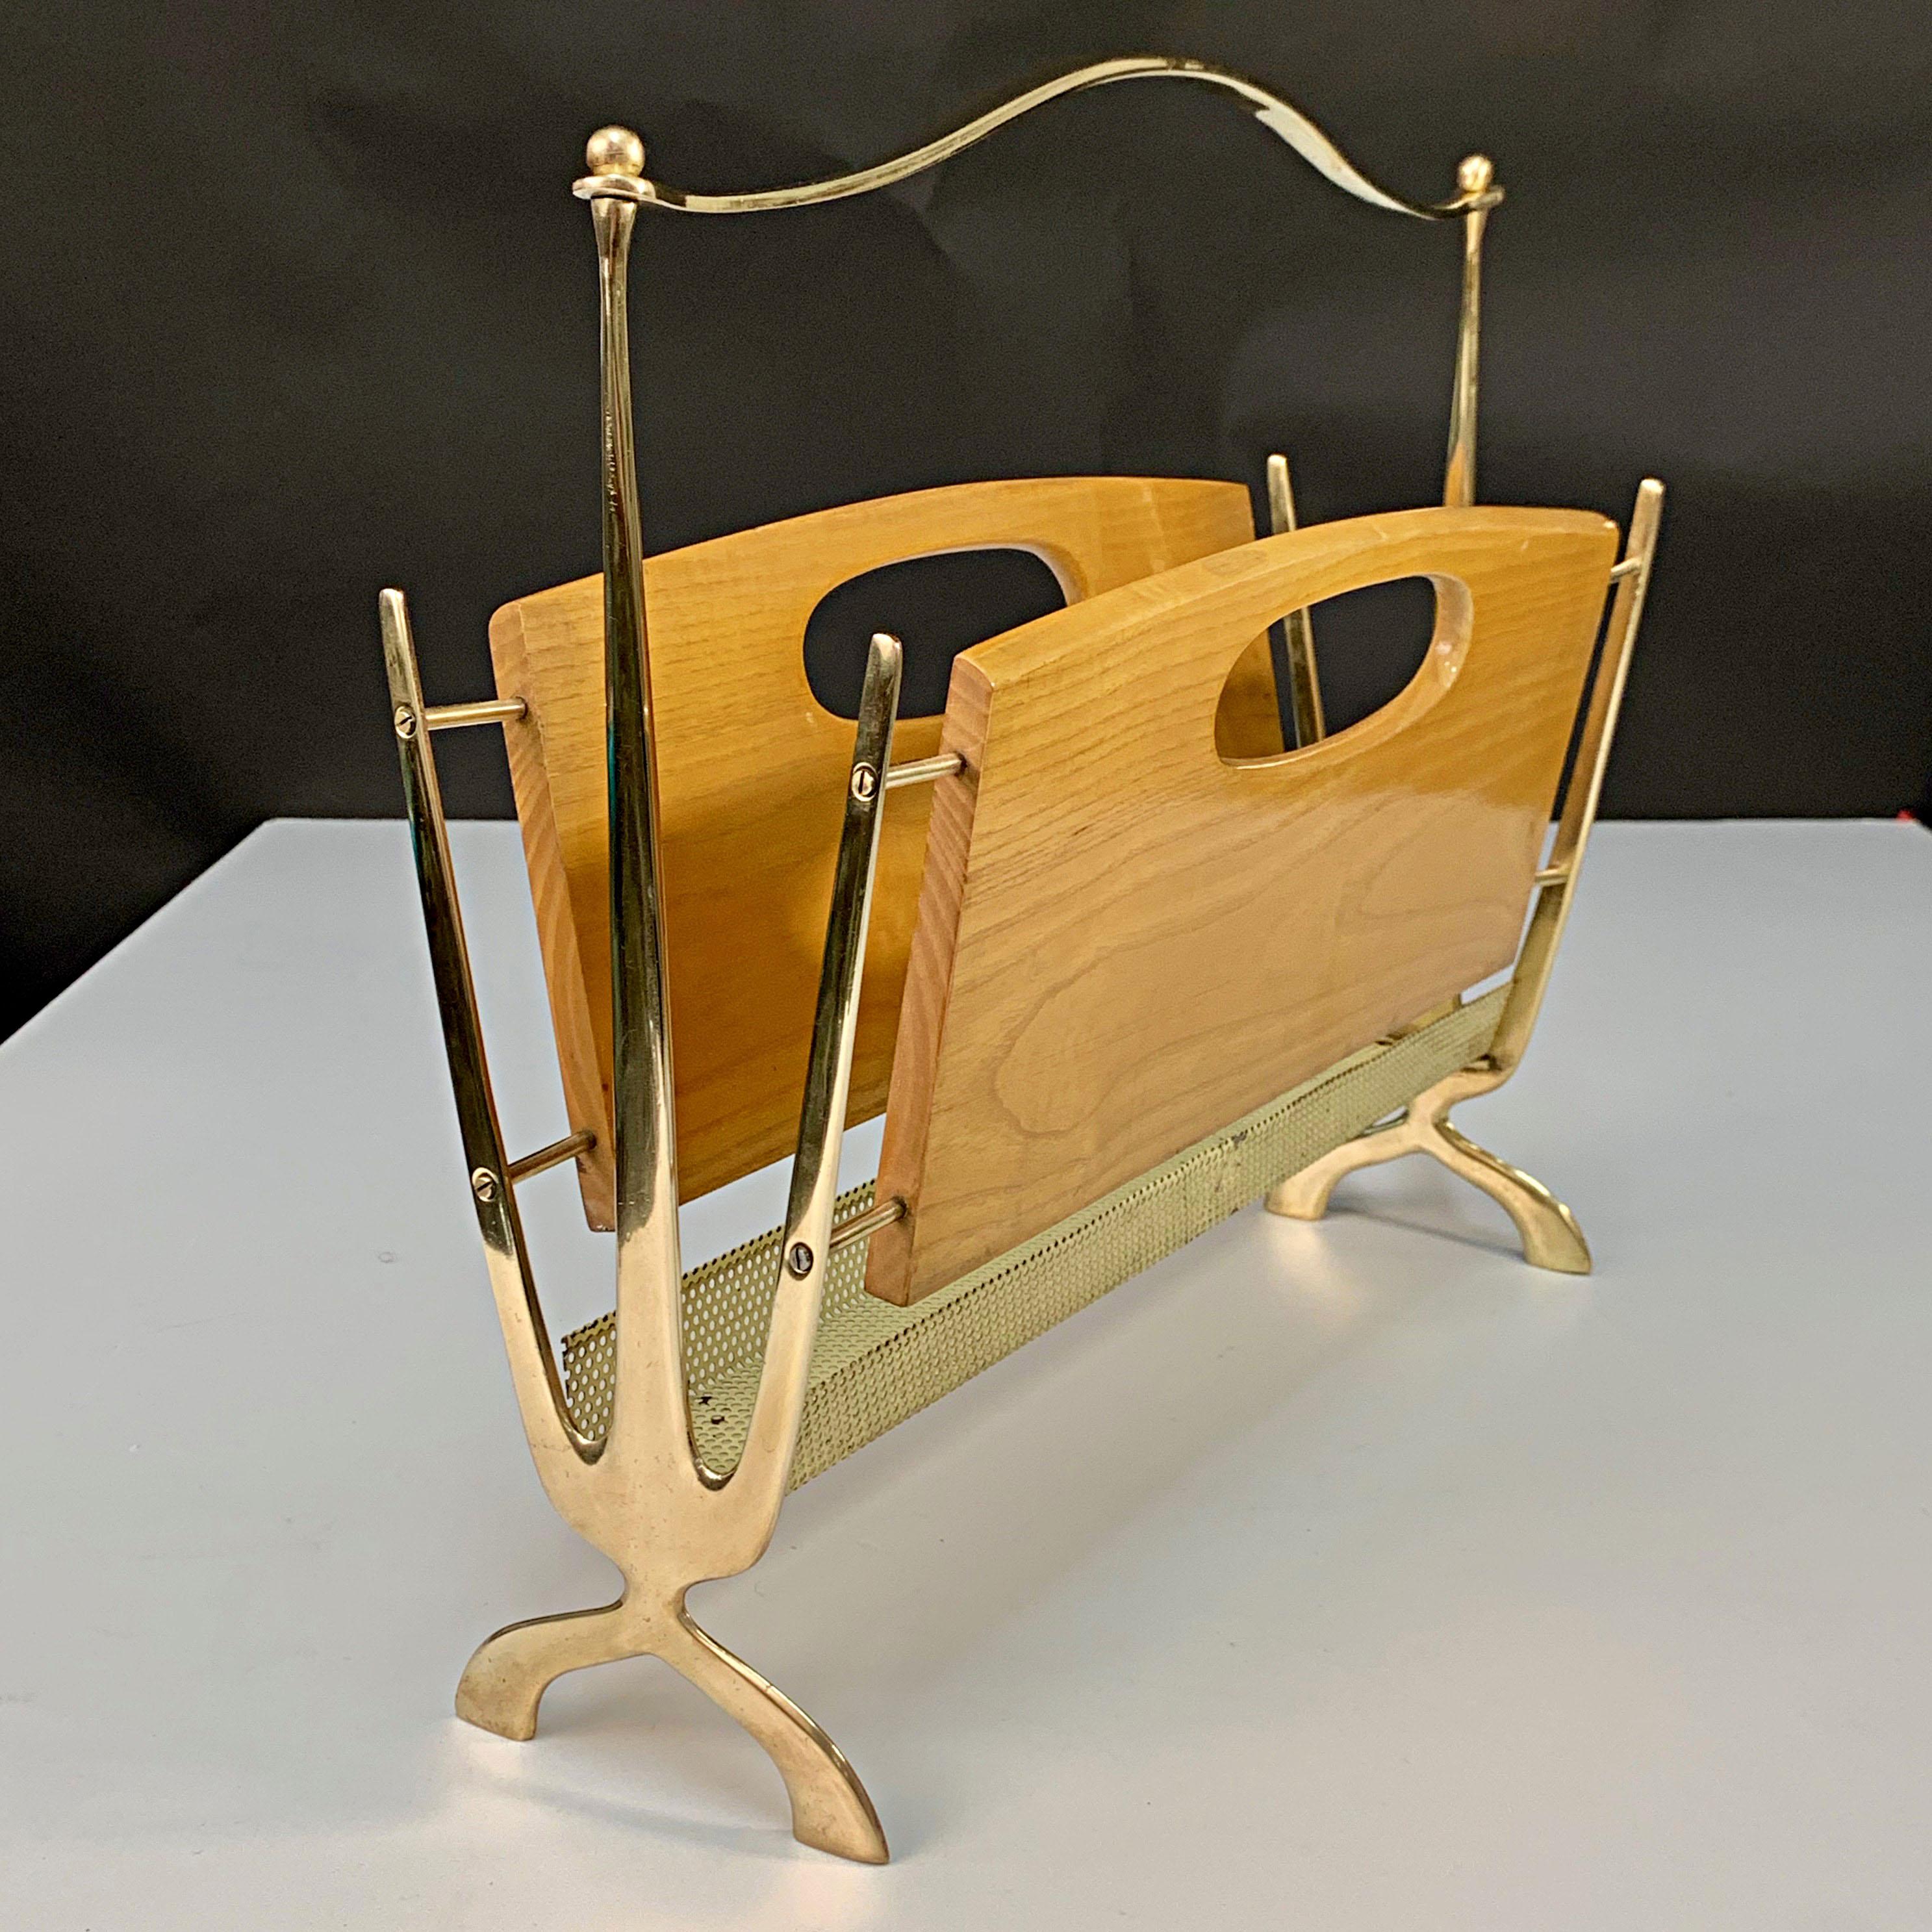 Maison Baguès Midcentury Brass and Chestnut Wood French Magazine Rack, 1950s For Sale 9